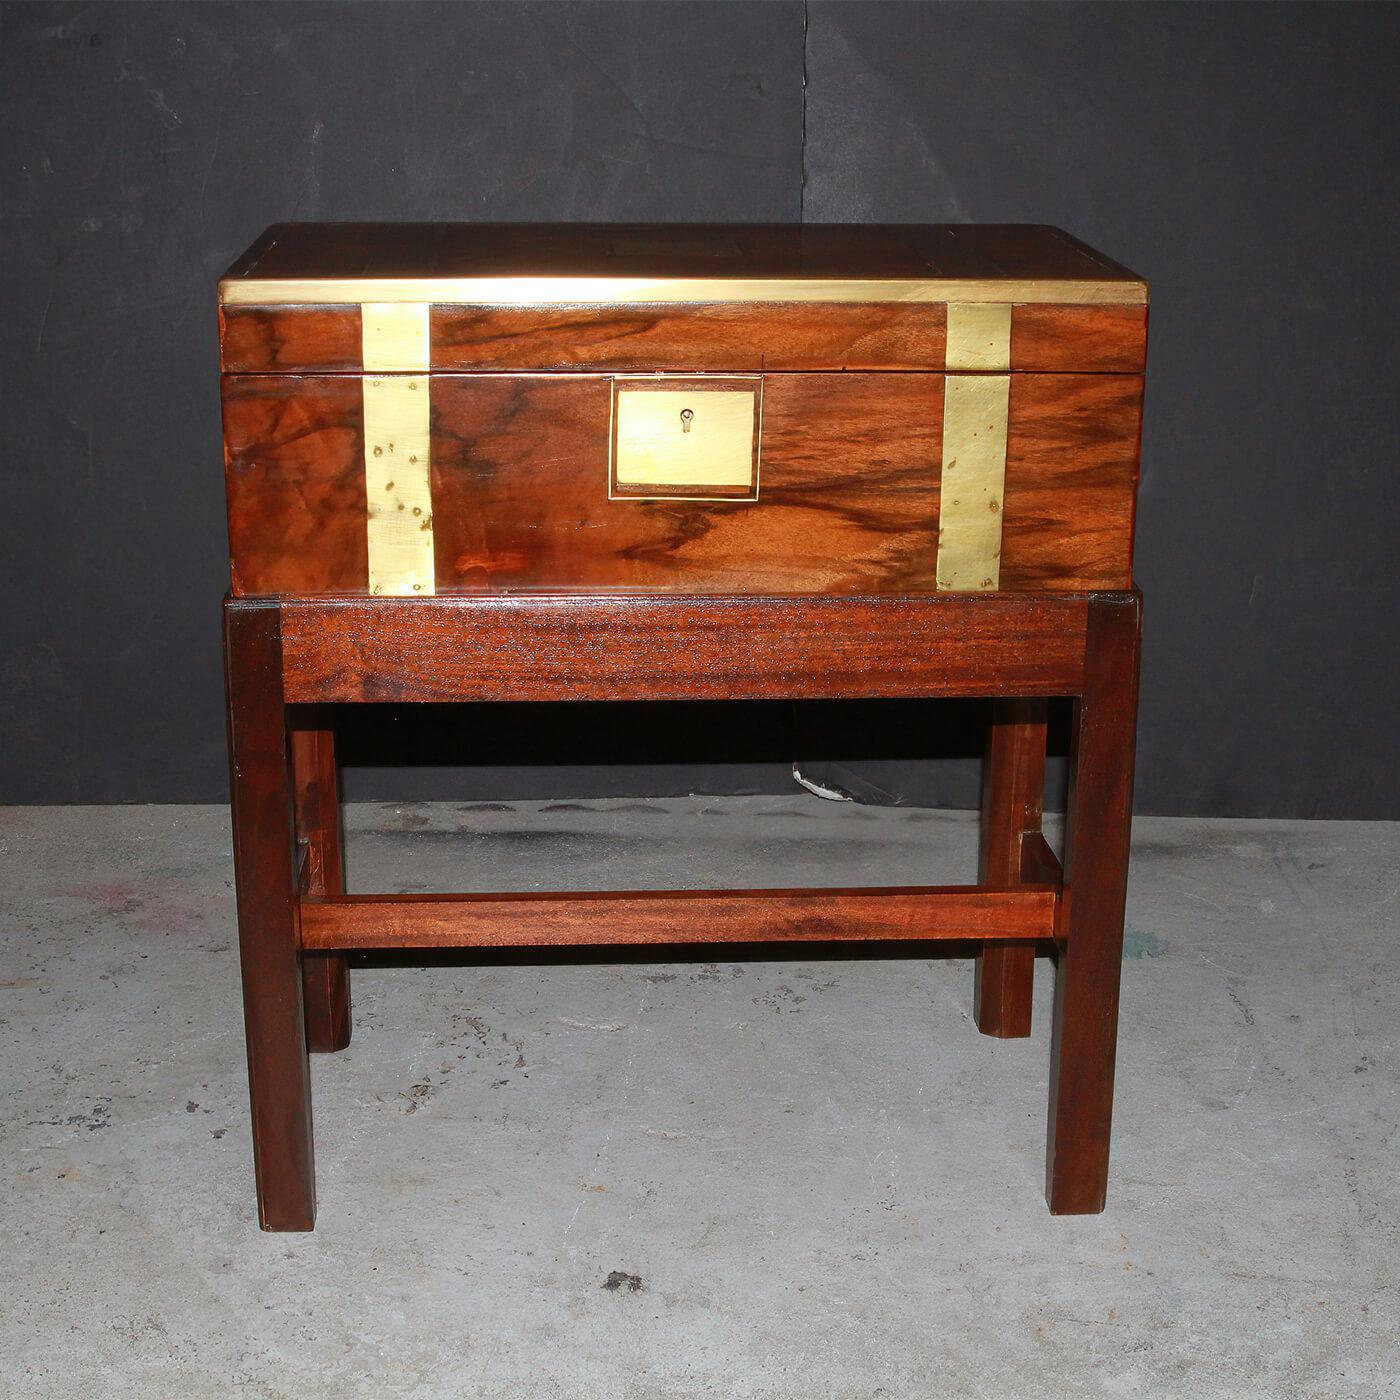 An English walnut brass bound Campaign form lap desk on stand. The interior with tooled leather writing surface and fitted compartments and raised on a later mahogany stand. Ca 1830's

Dimensions: 19.75